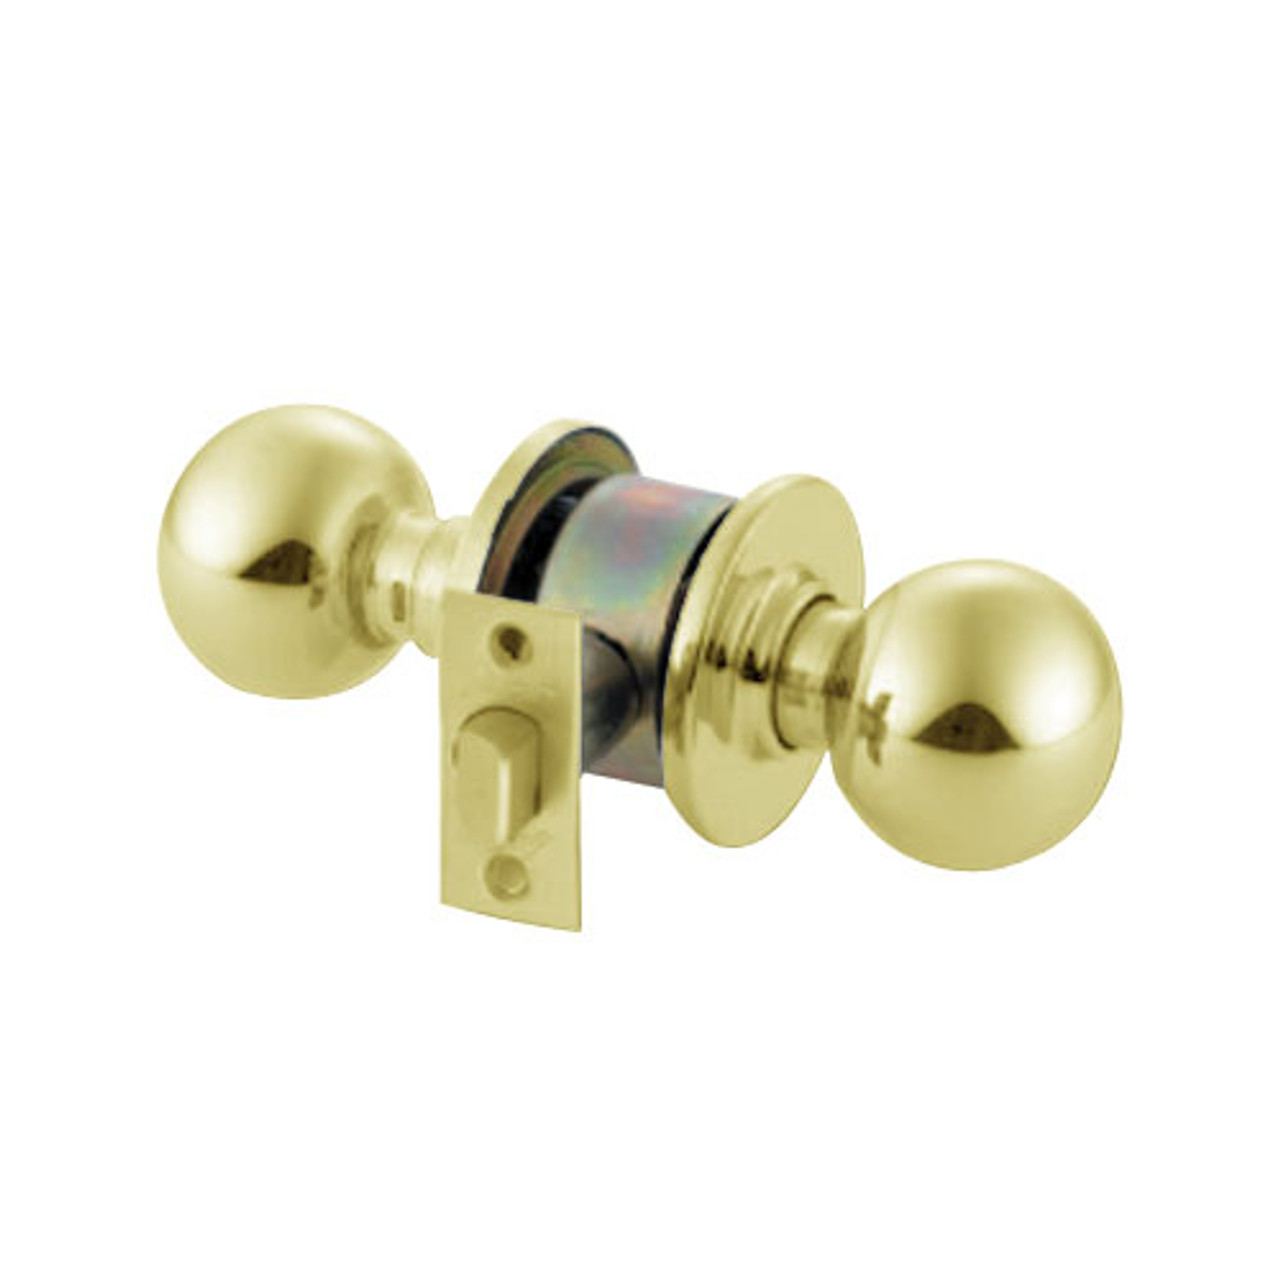 MK04-TA-03 Arrow Lock MK Series Non Keyed Cylindrical Locksets for Patio with TA Knob in Bright Brass